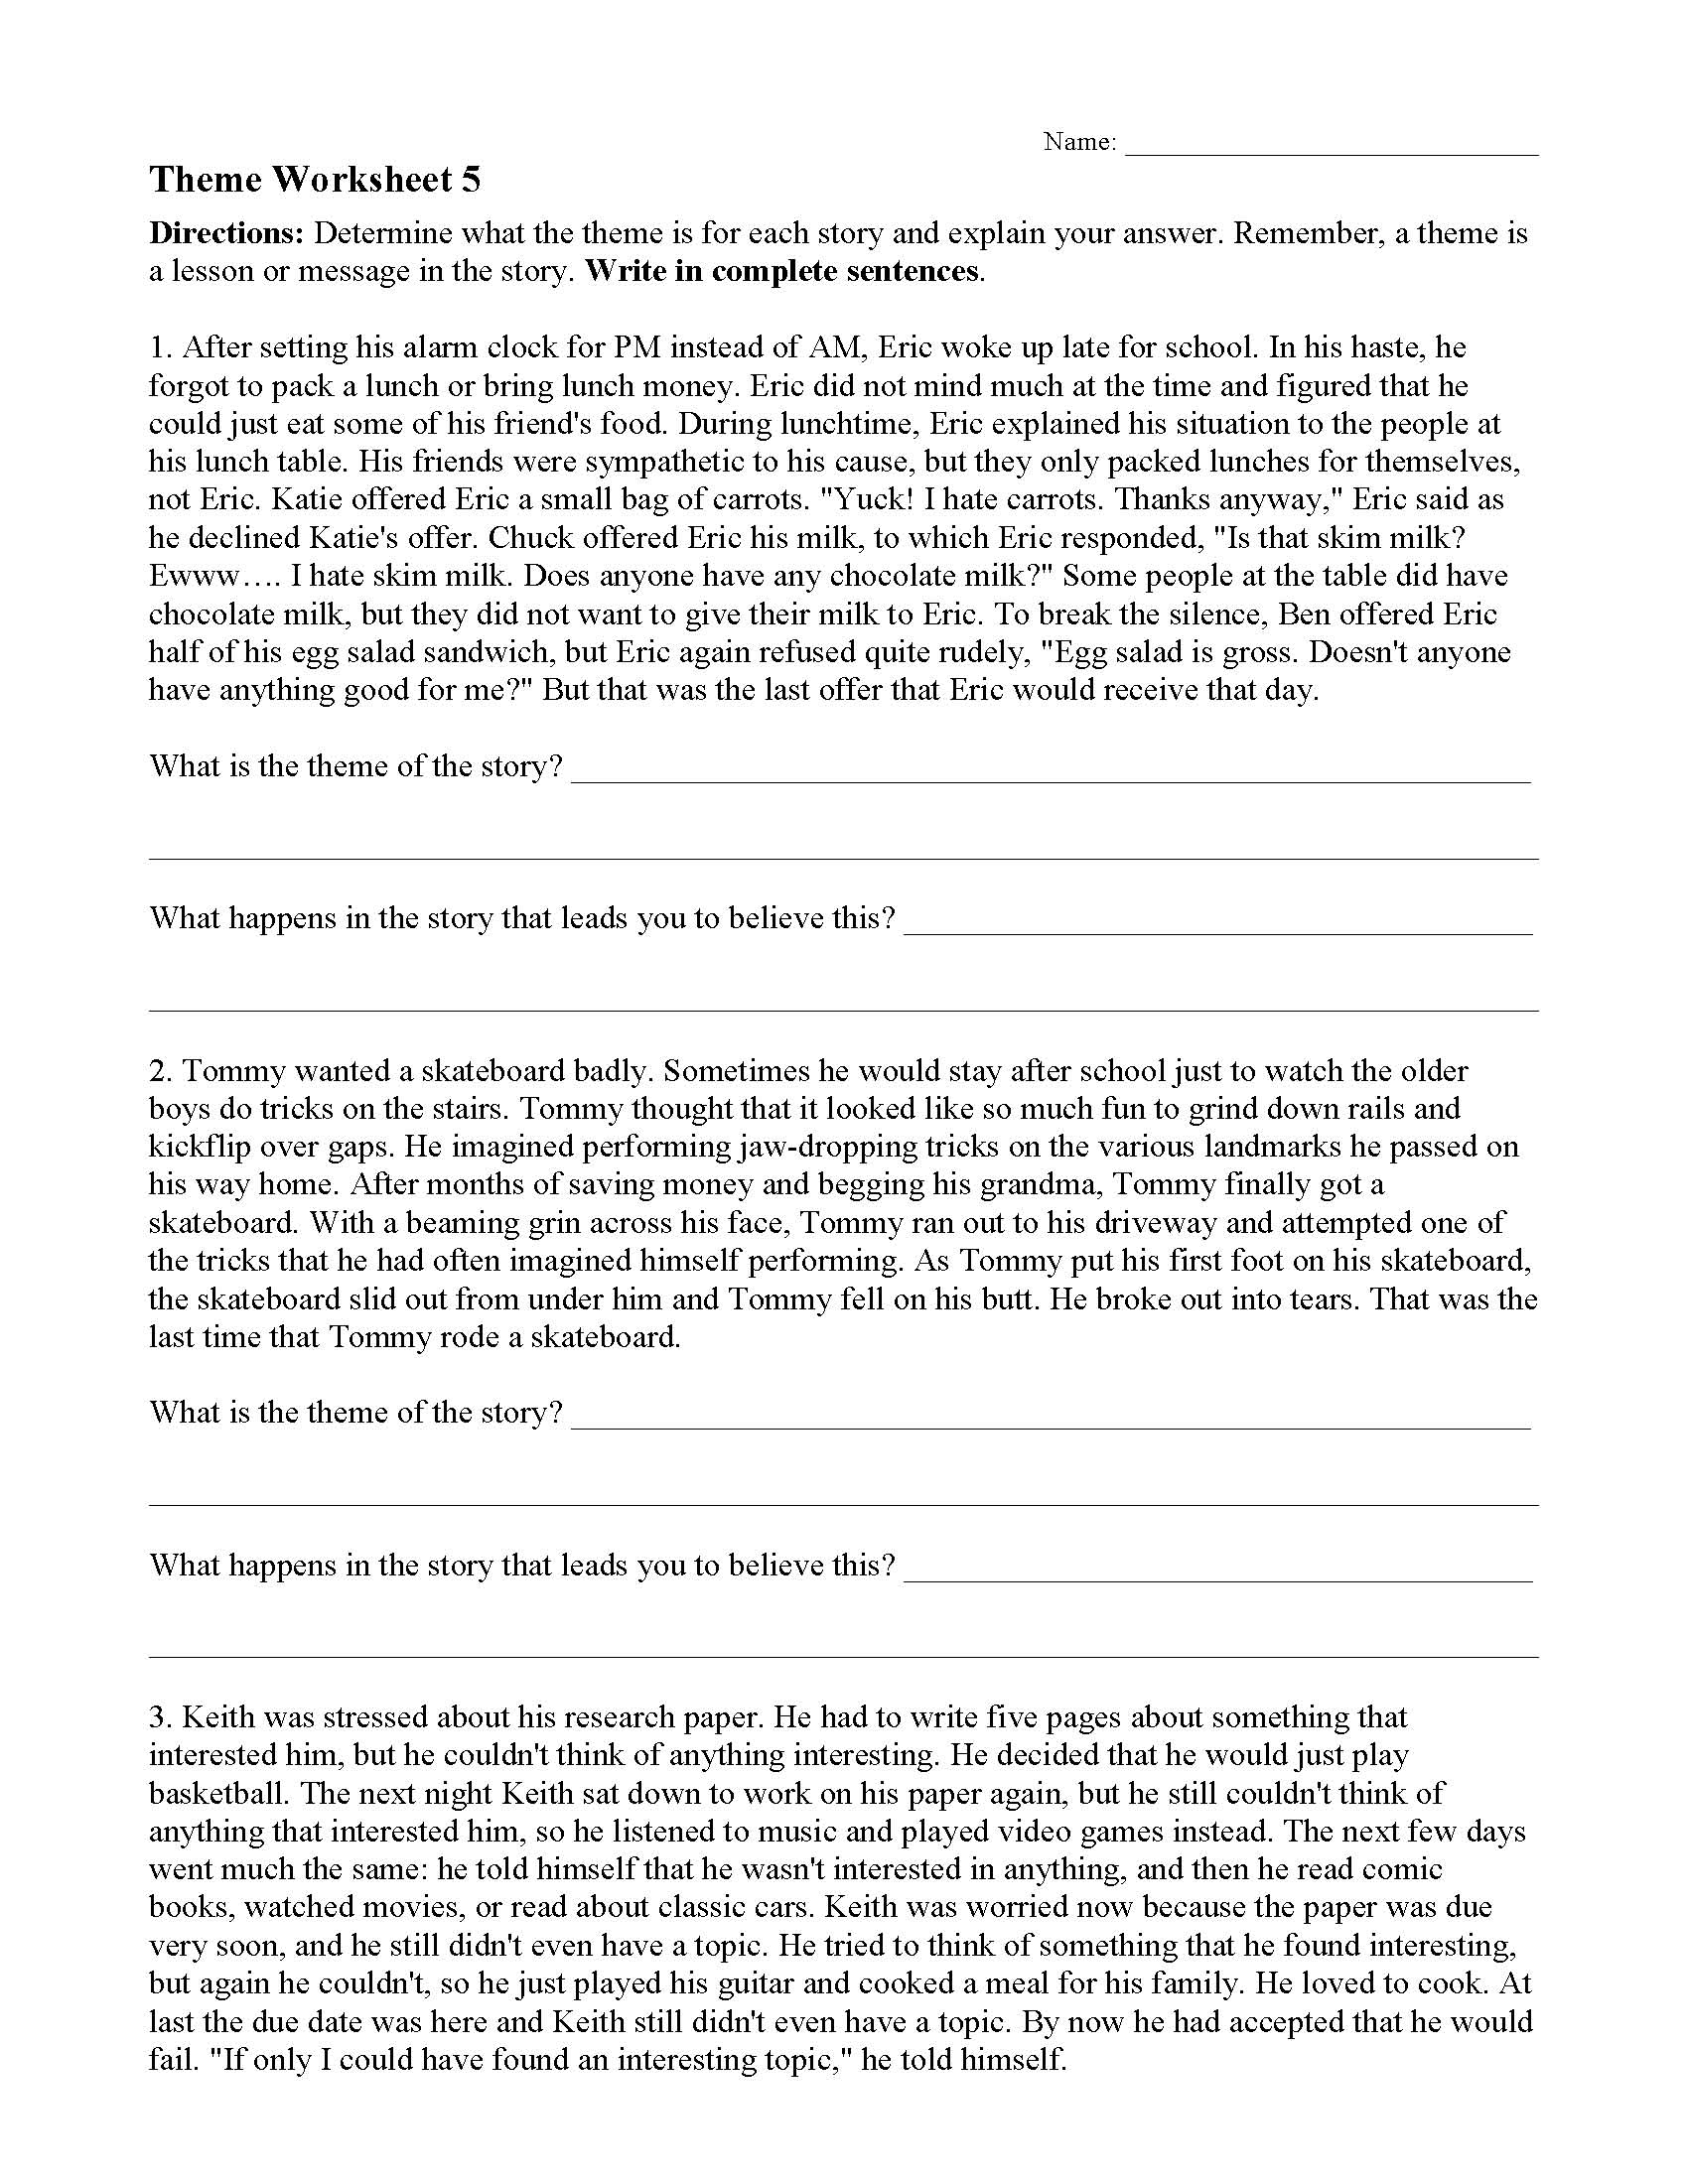 Theme Worksheet 5 Preview